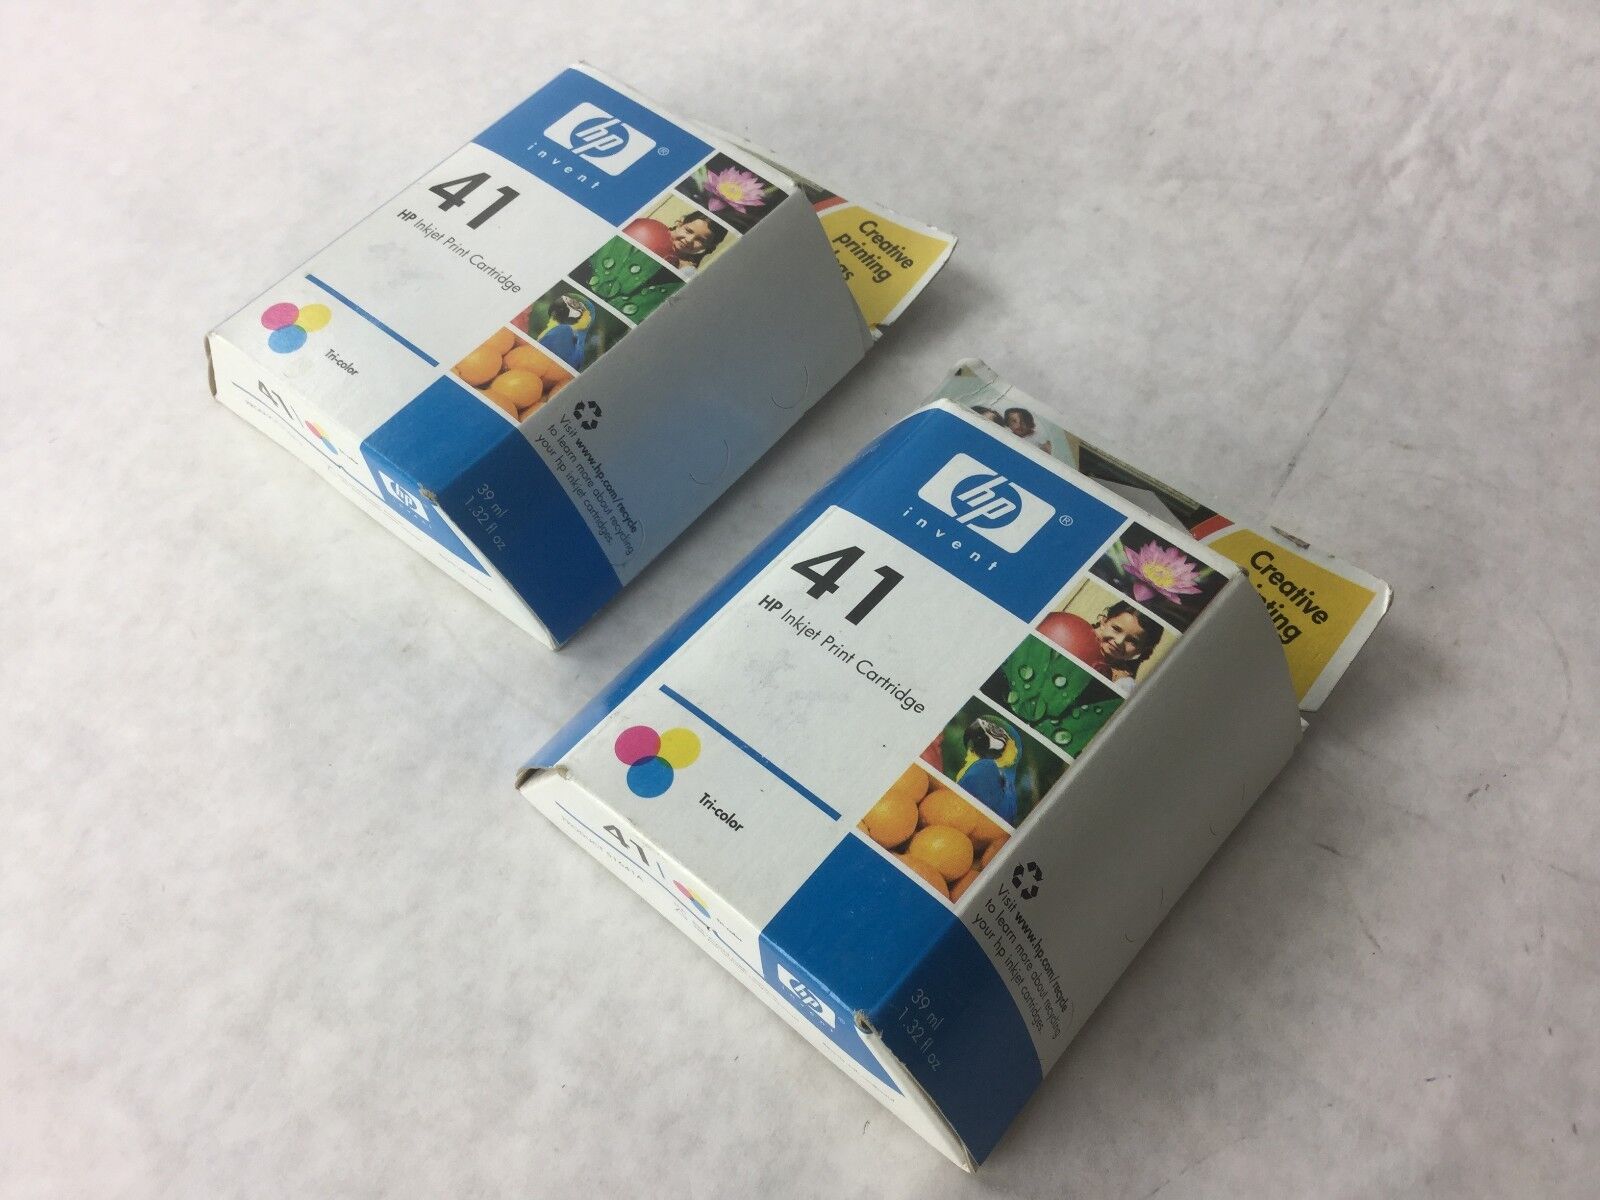 Genuine HP 41 Tri Color Ink Cartridge (51641A) Lot of 2